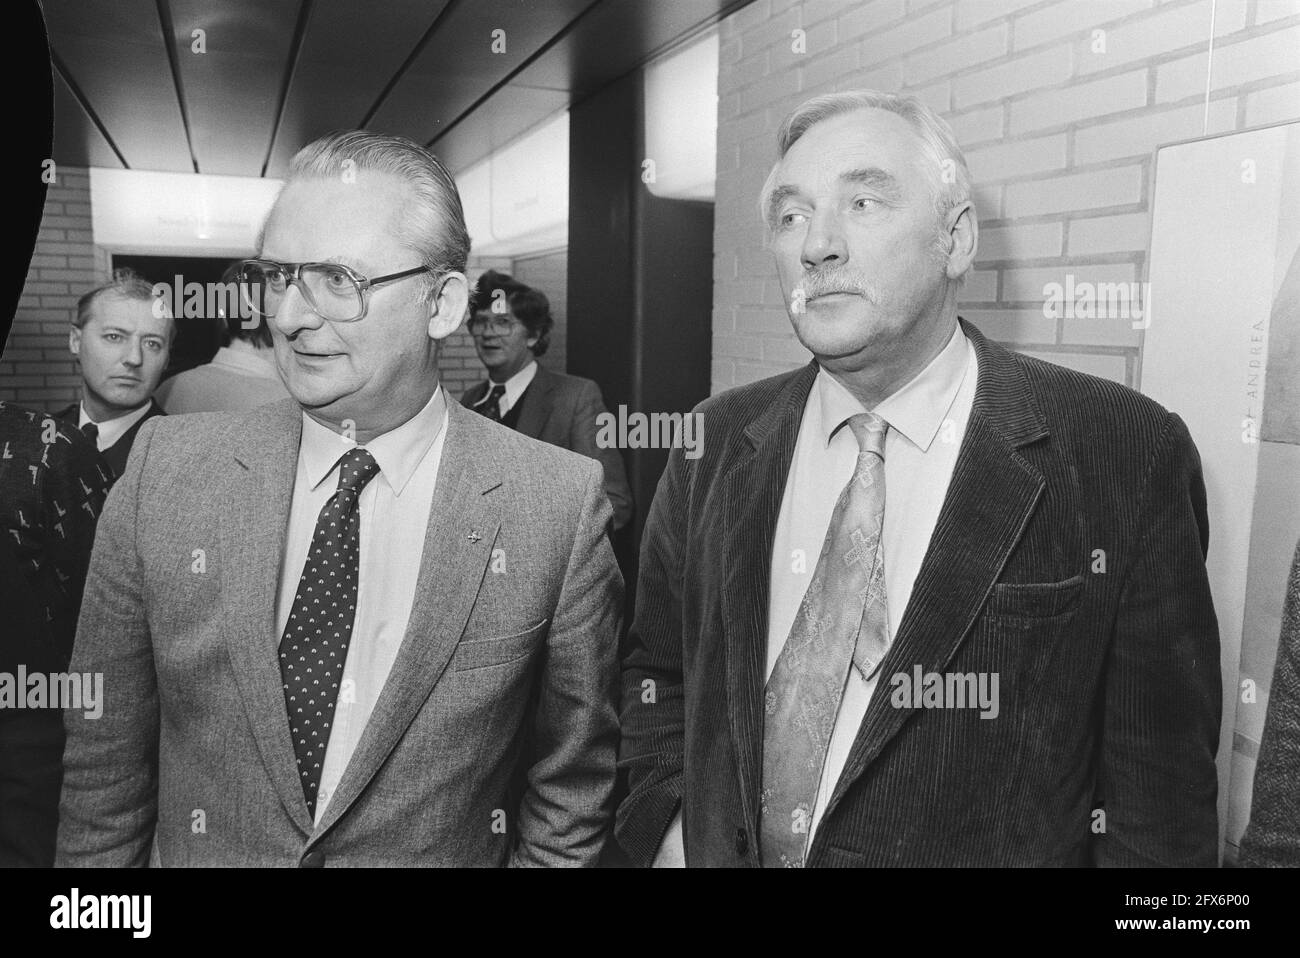 AbvaKabo chairman Van der Scheur and CFO chairman De Jong (l), November 21, 1983, civil servants, wage and price policy, unions, meetings, chairmen, The Netherlands, 20th century press agency photo, news to remember, documentary, historic photography 1945-1990, visual stories, human history of the Twentieth Century, capturing moments in time Stock Photo